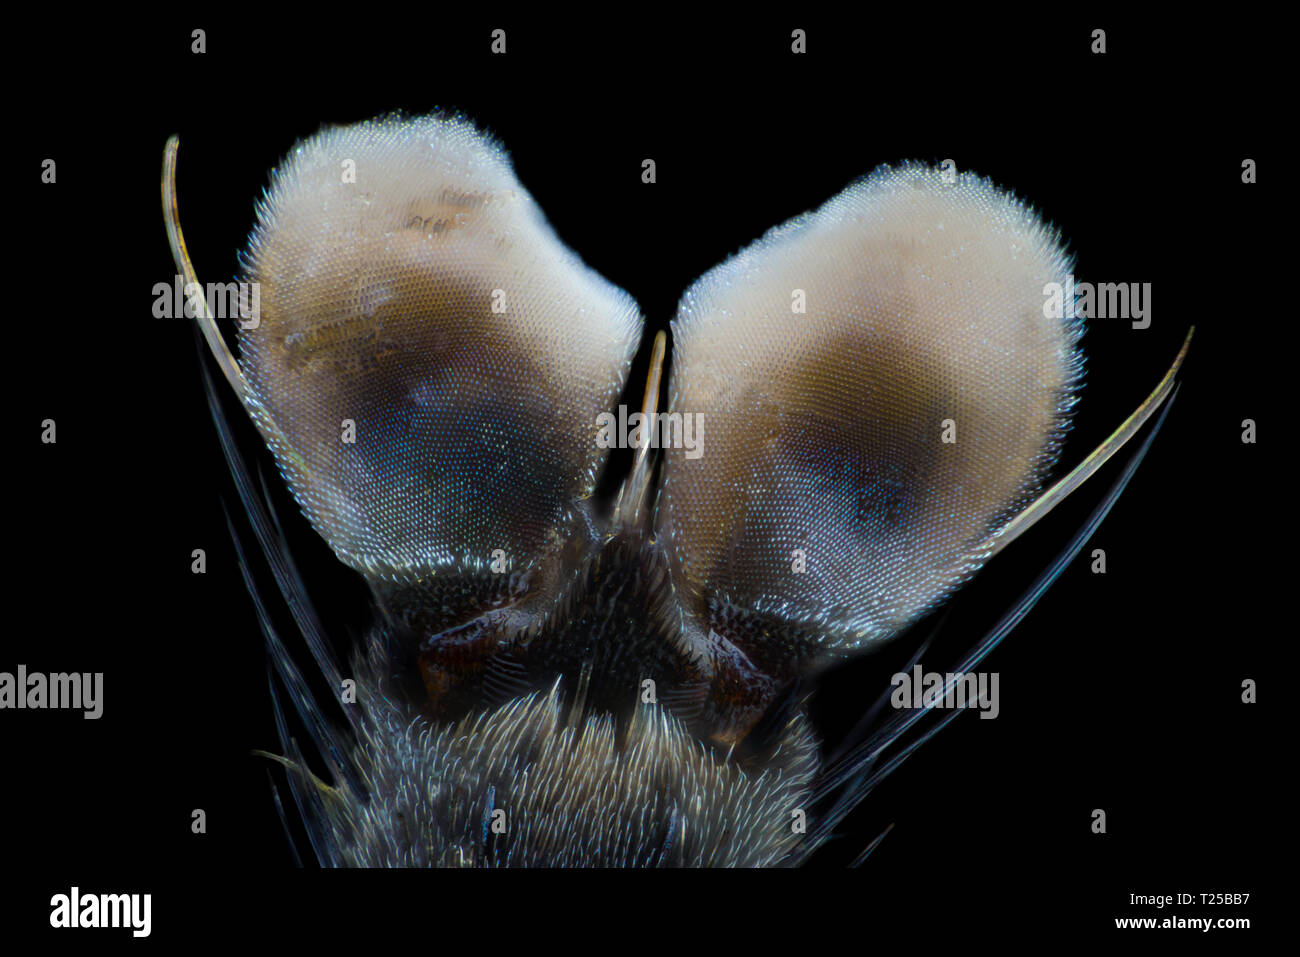 Extreme magnification - Fly paw at microscope, 50x magnification Stock Photo